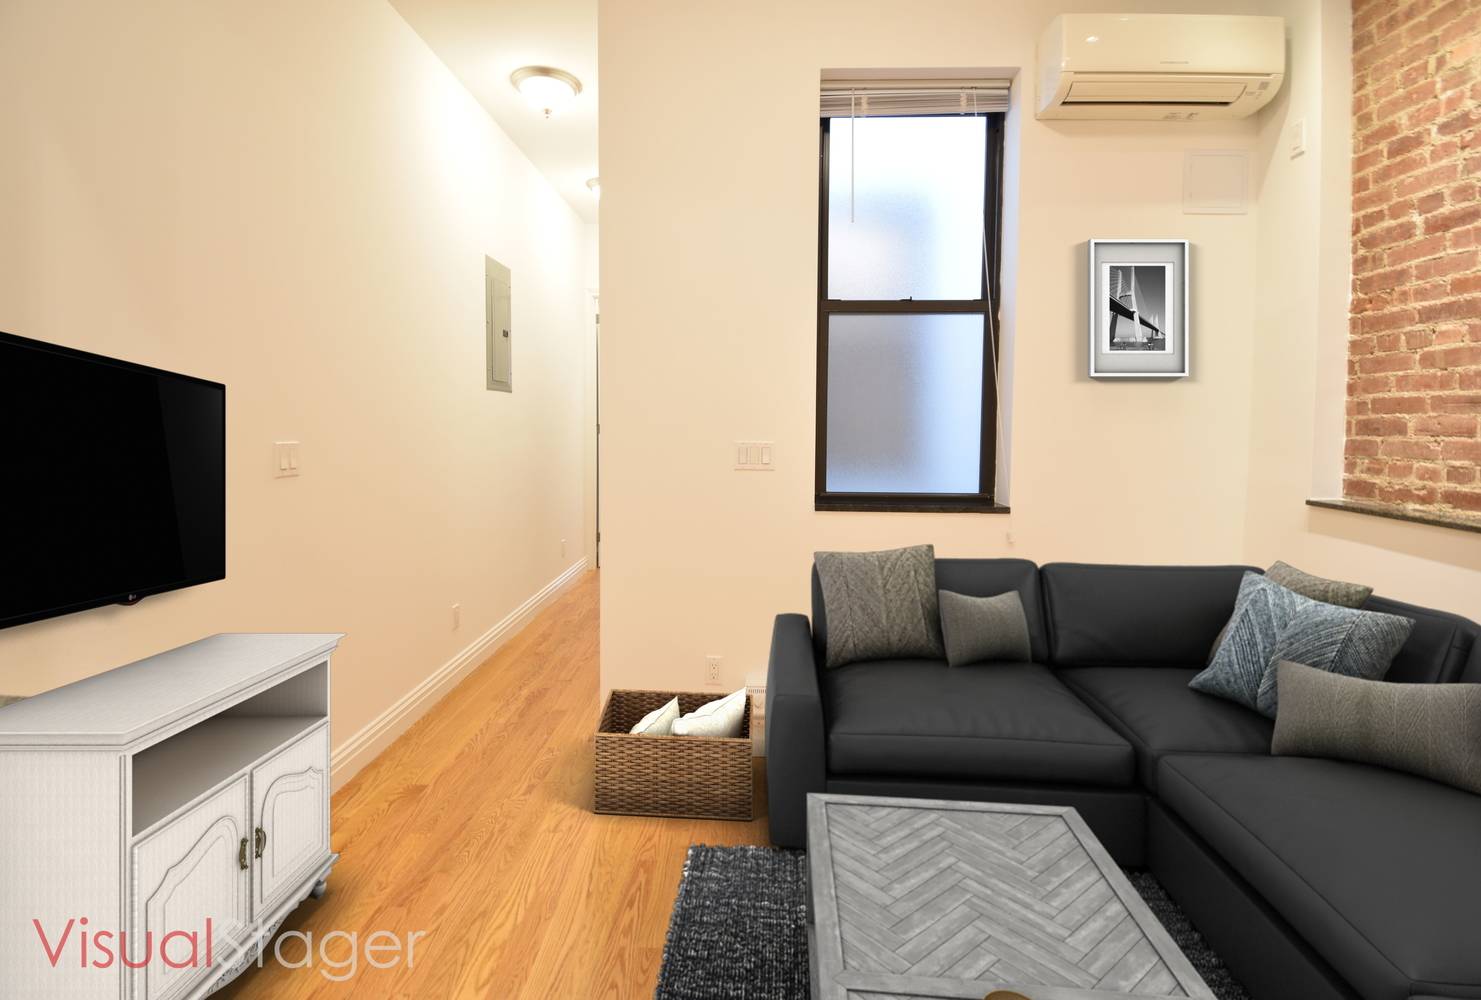 NO PETS ! This spectacular RENOVATED, apartment features stainless steel appliances, hardwood floors throughout the unit, exposed brick, modern kitchen with dishwasher and microwave.